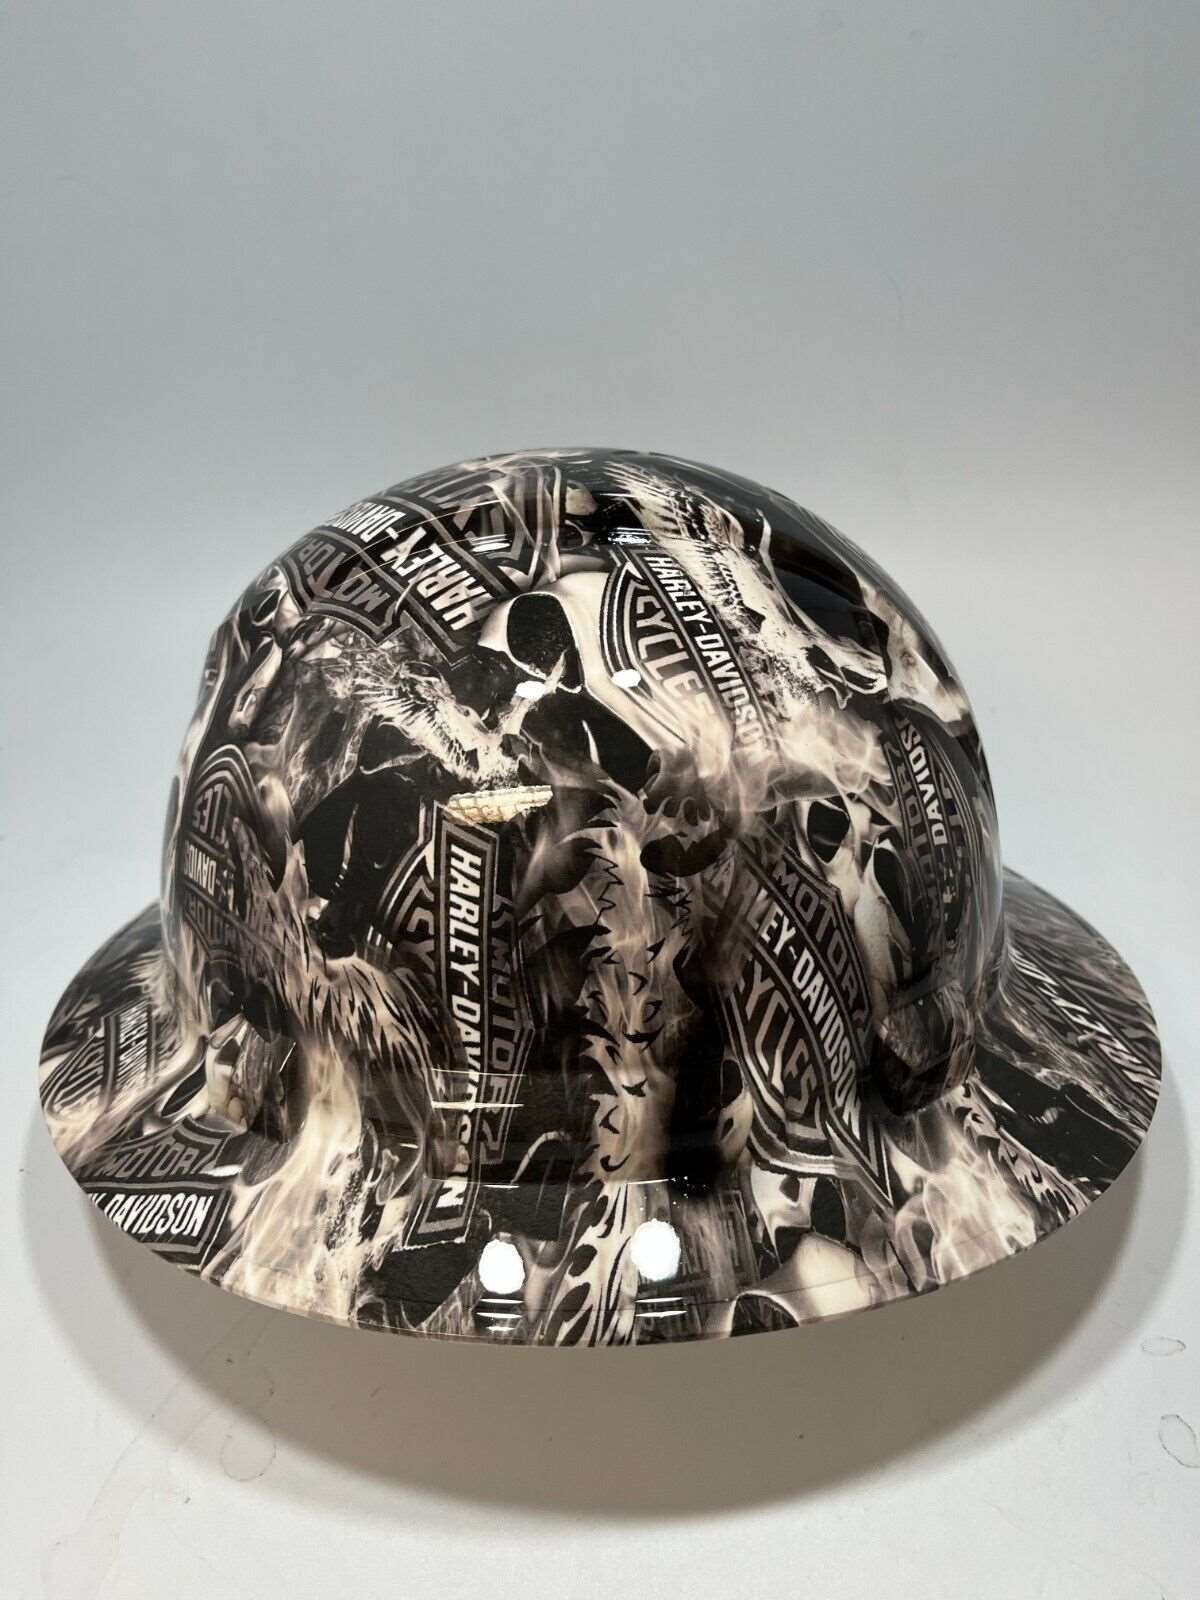 Bad ass hardhat with a hydro dipped skull design